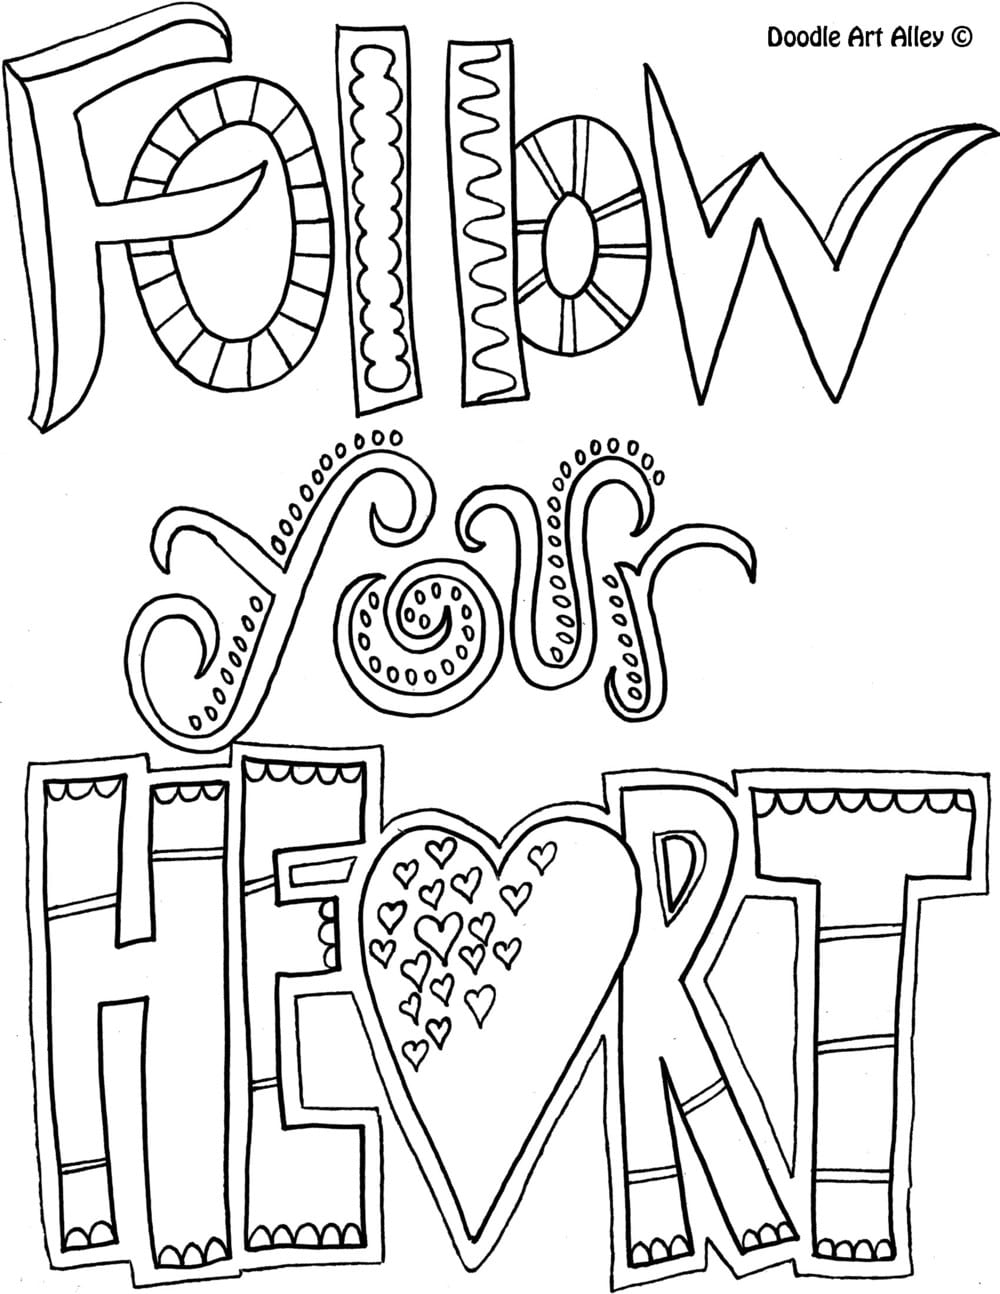 Follow Your Heart | gurussay | coloring pages for kids to print